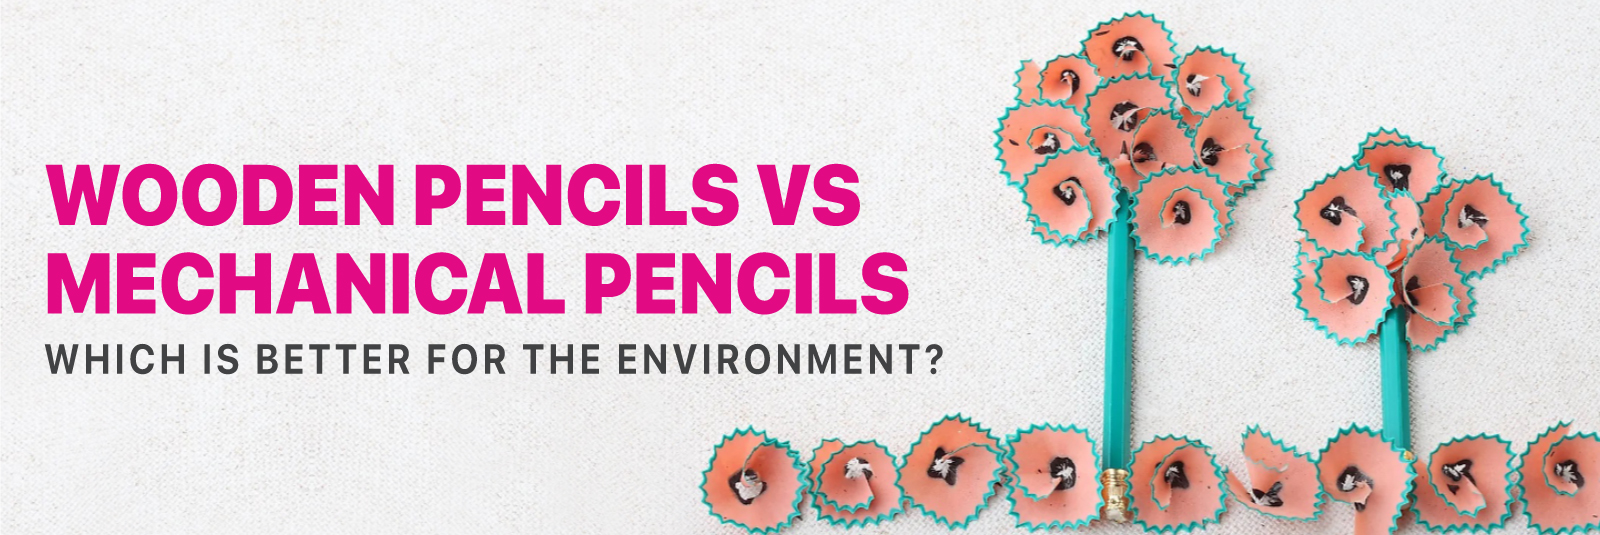 Which is Better for The Environment Wooden Pencils or Mechanical Pencils?